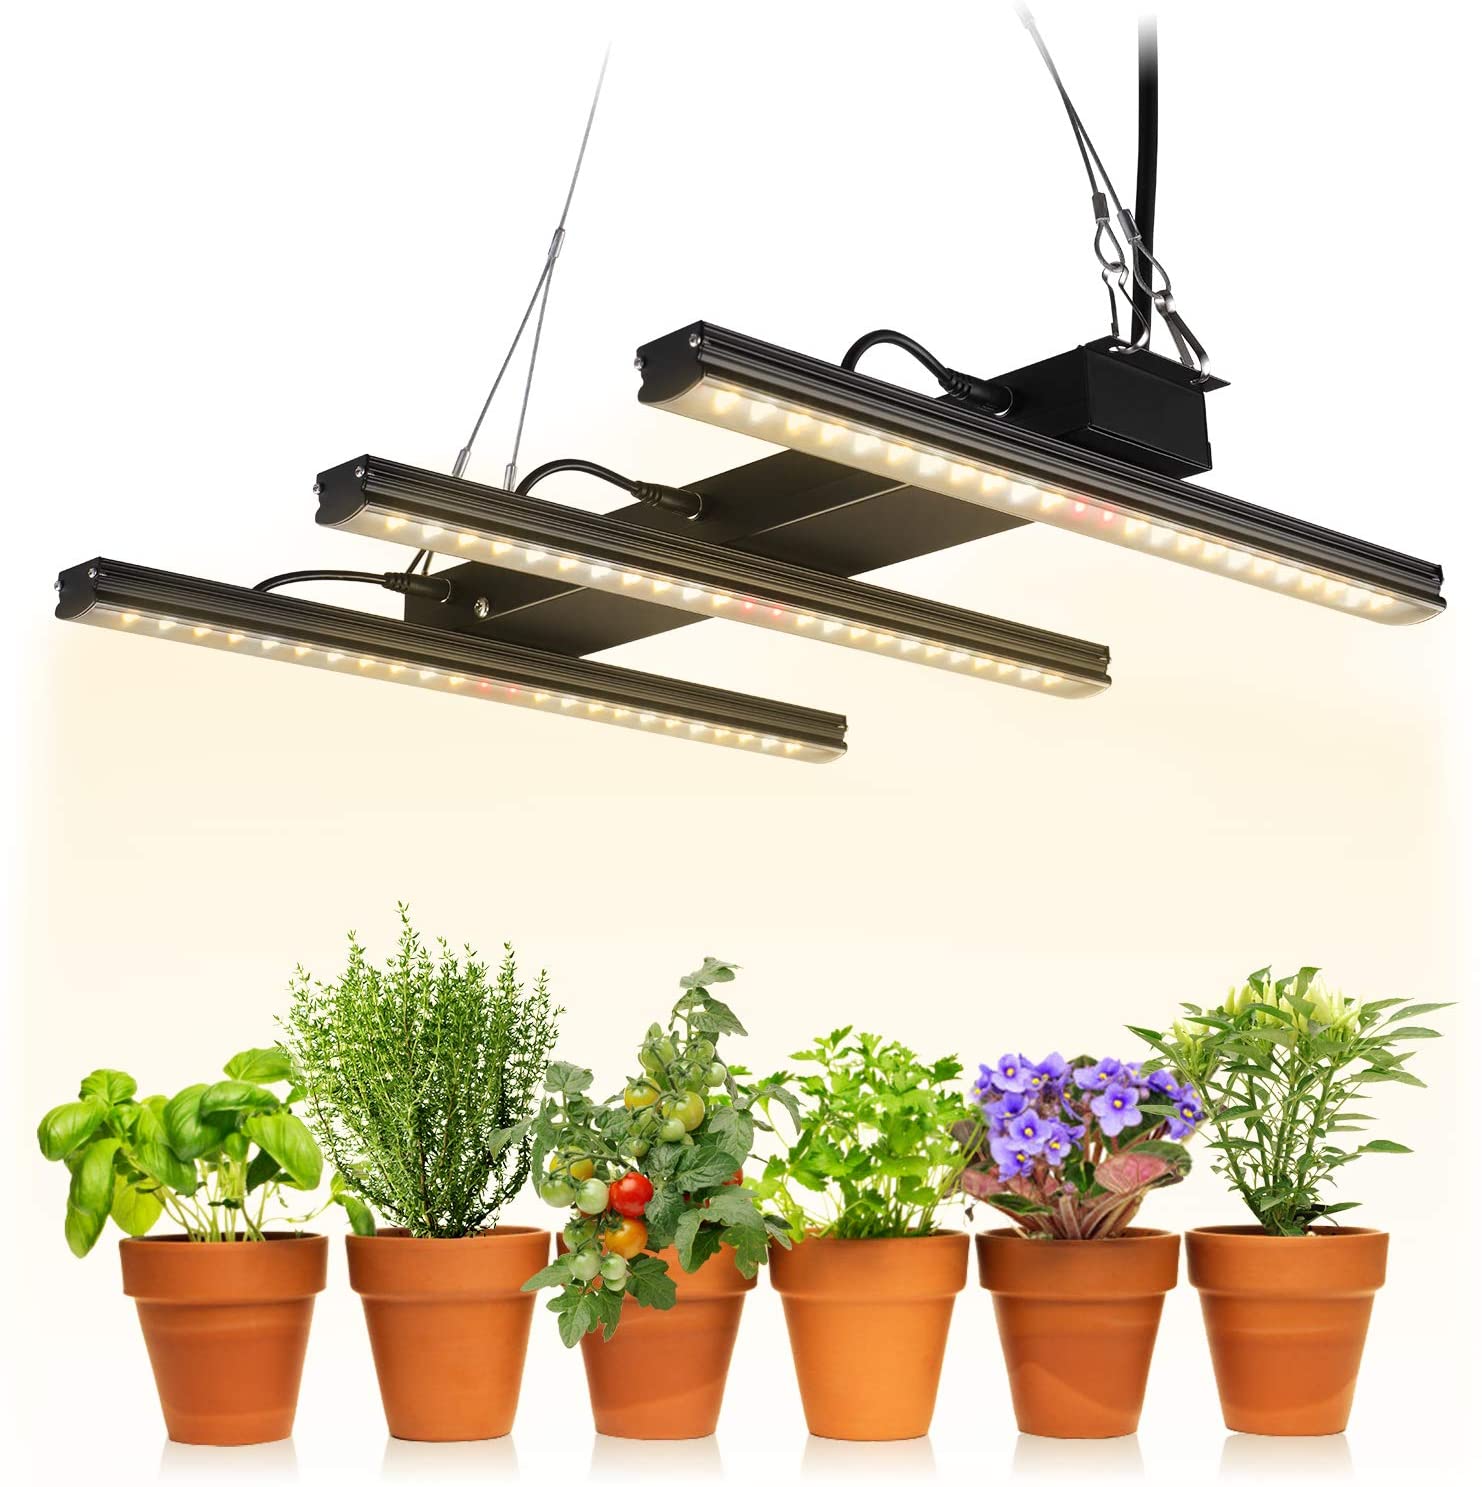 TORCHSTAR LED Indoor Plant Grow Light, Linkable Full Spectrum Hanging Mount Fixture, 140 LEDs Plug & Play Lighting, Sunlike 4320lm for Mints, Tomatoes, Chili, 3 Years Warranty